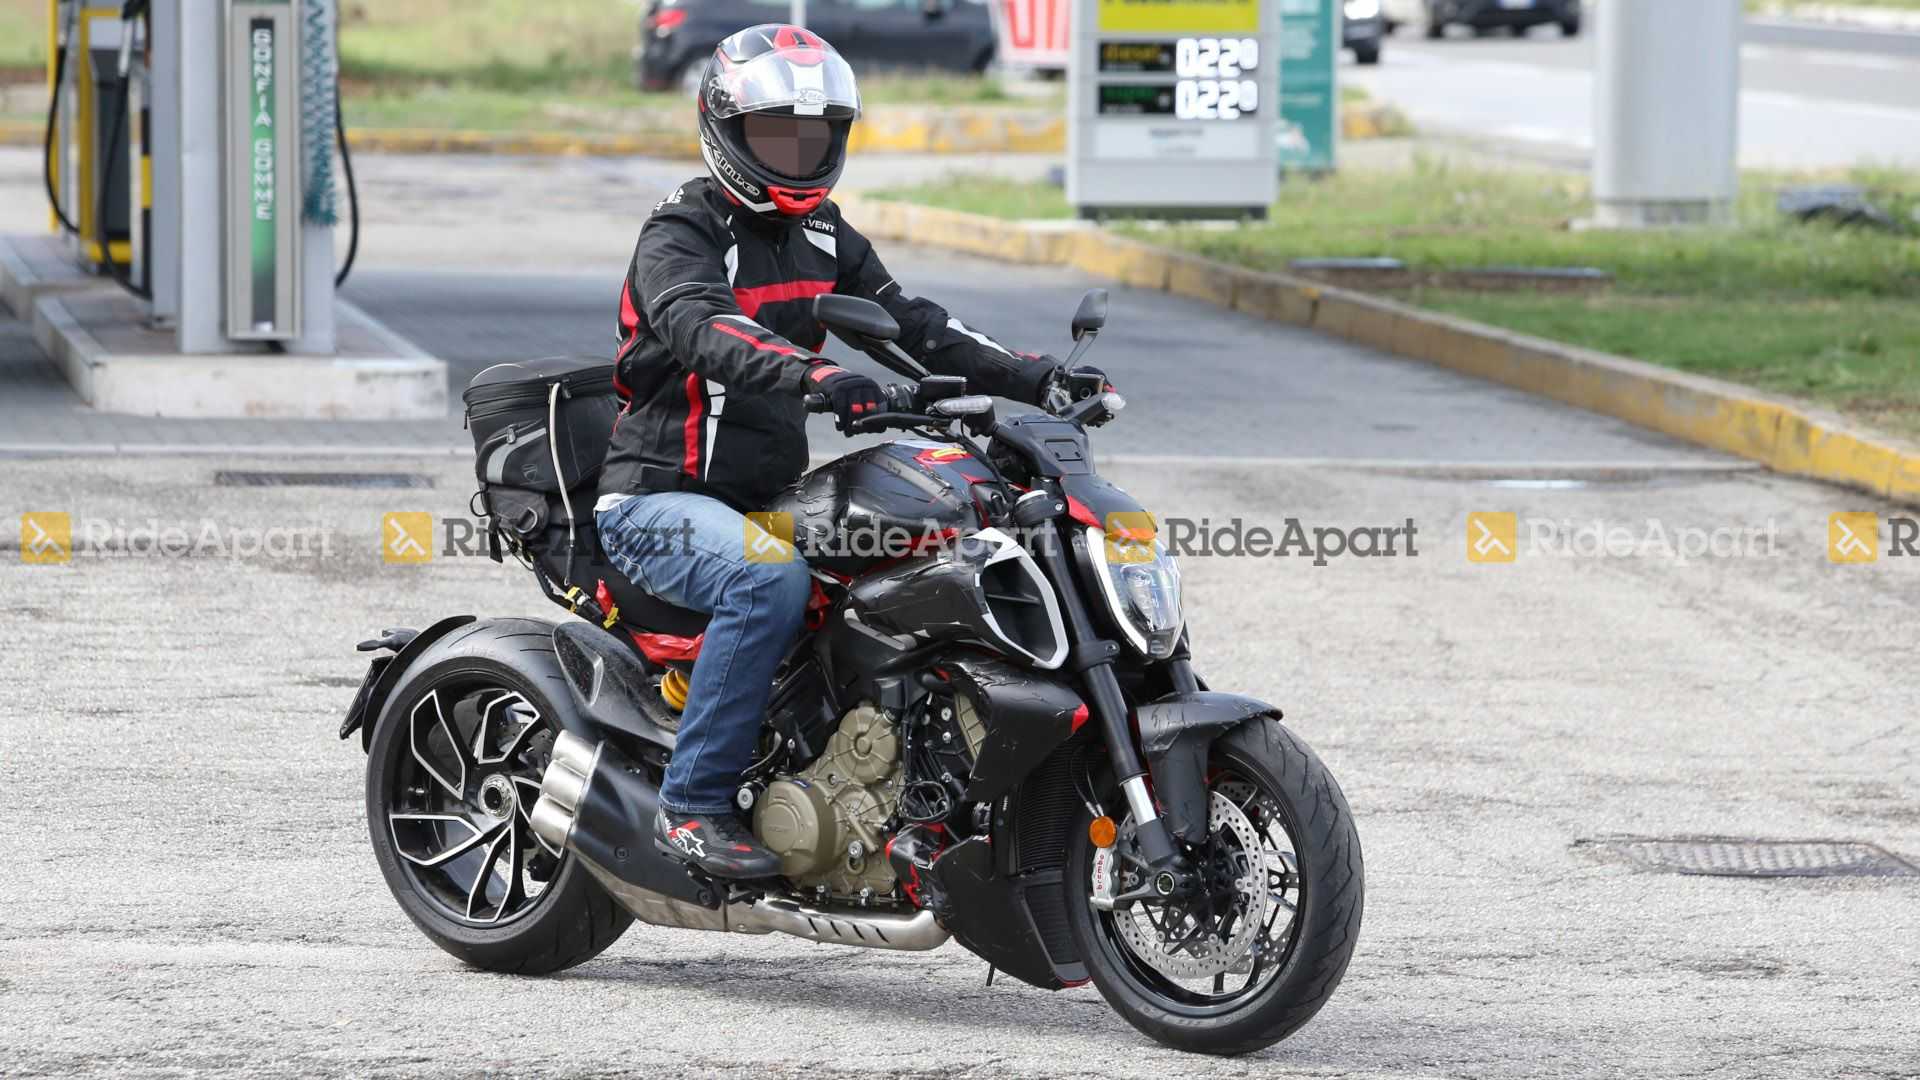 Ducati Diavel V4 Spotted Testing In Europe, To Get More Fire Power